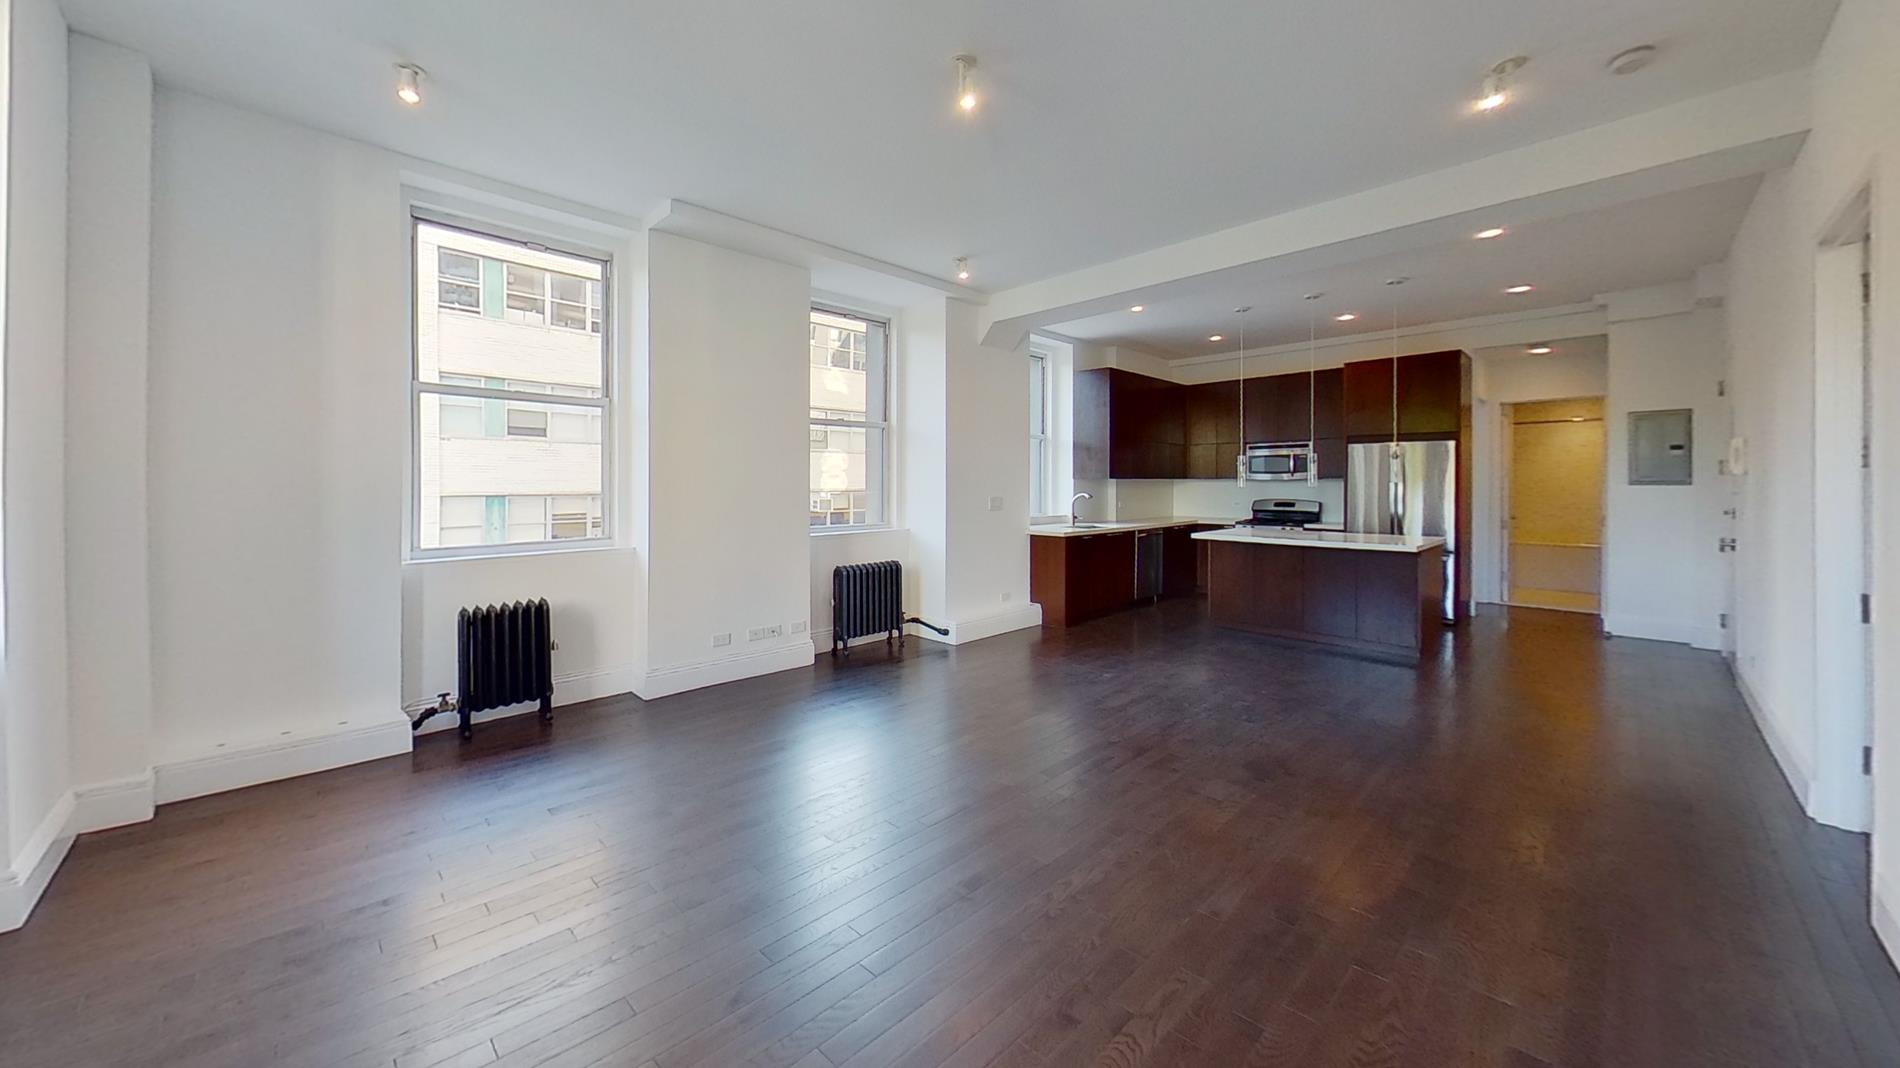 31 Union Square 3-A, Flatiron District, Downtown, NYC - 2 Bedrooms  
2 Bathrooms  
4 Rooms - 